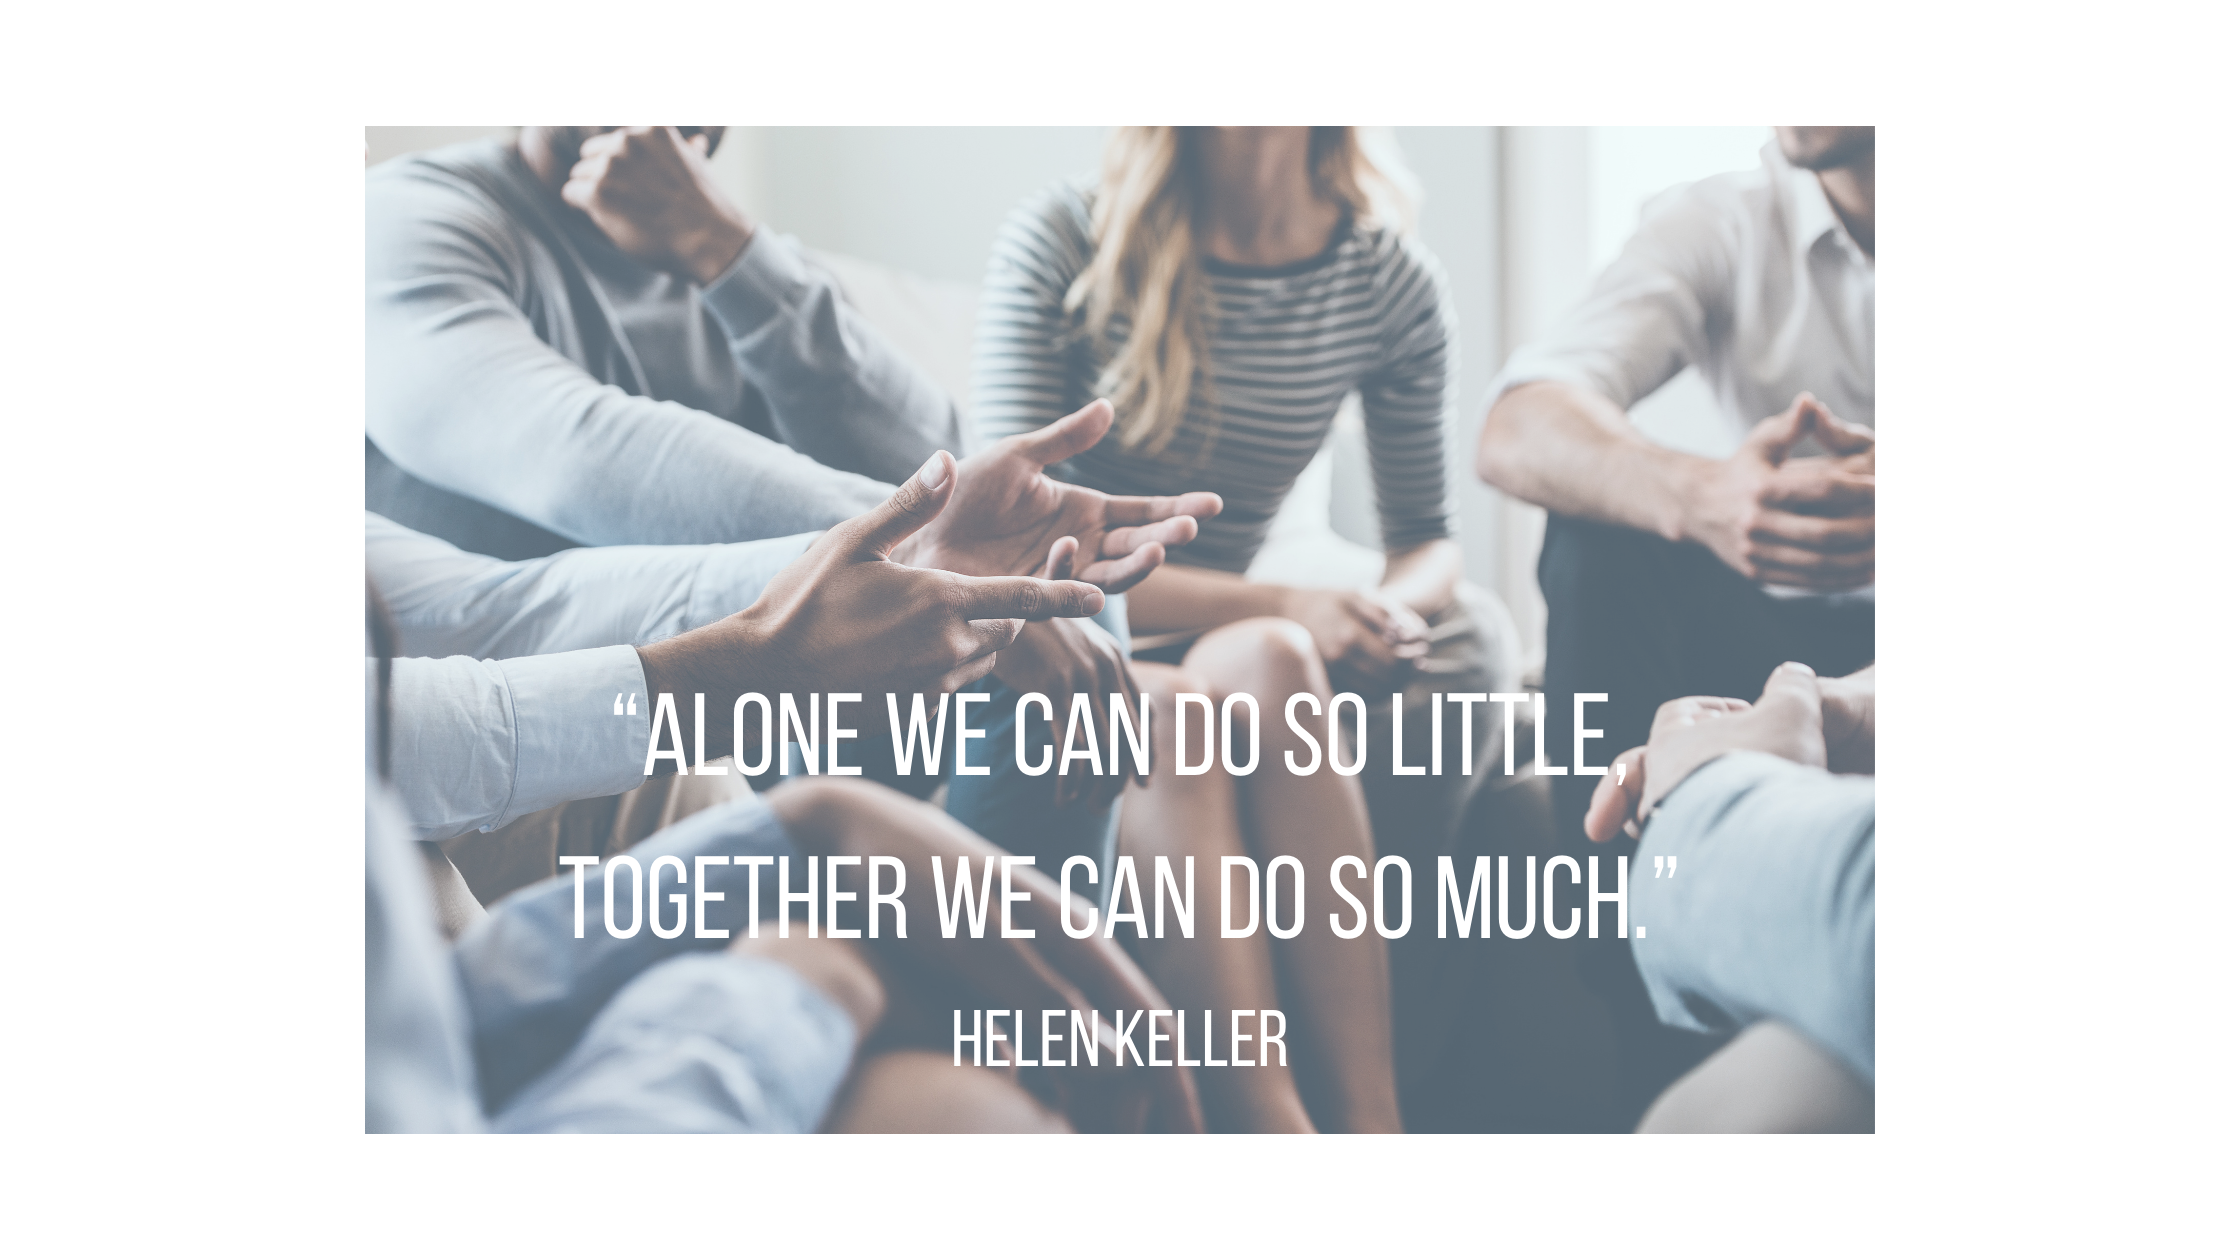 an image of people in a meeting with the words "alone we can do so little together we can do so much"